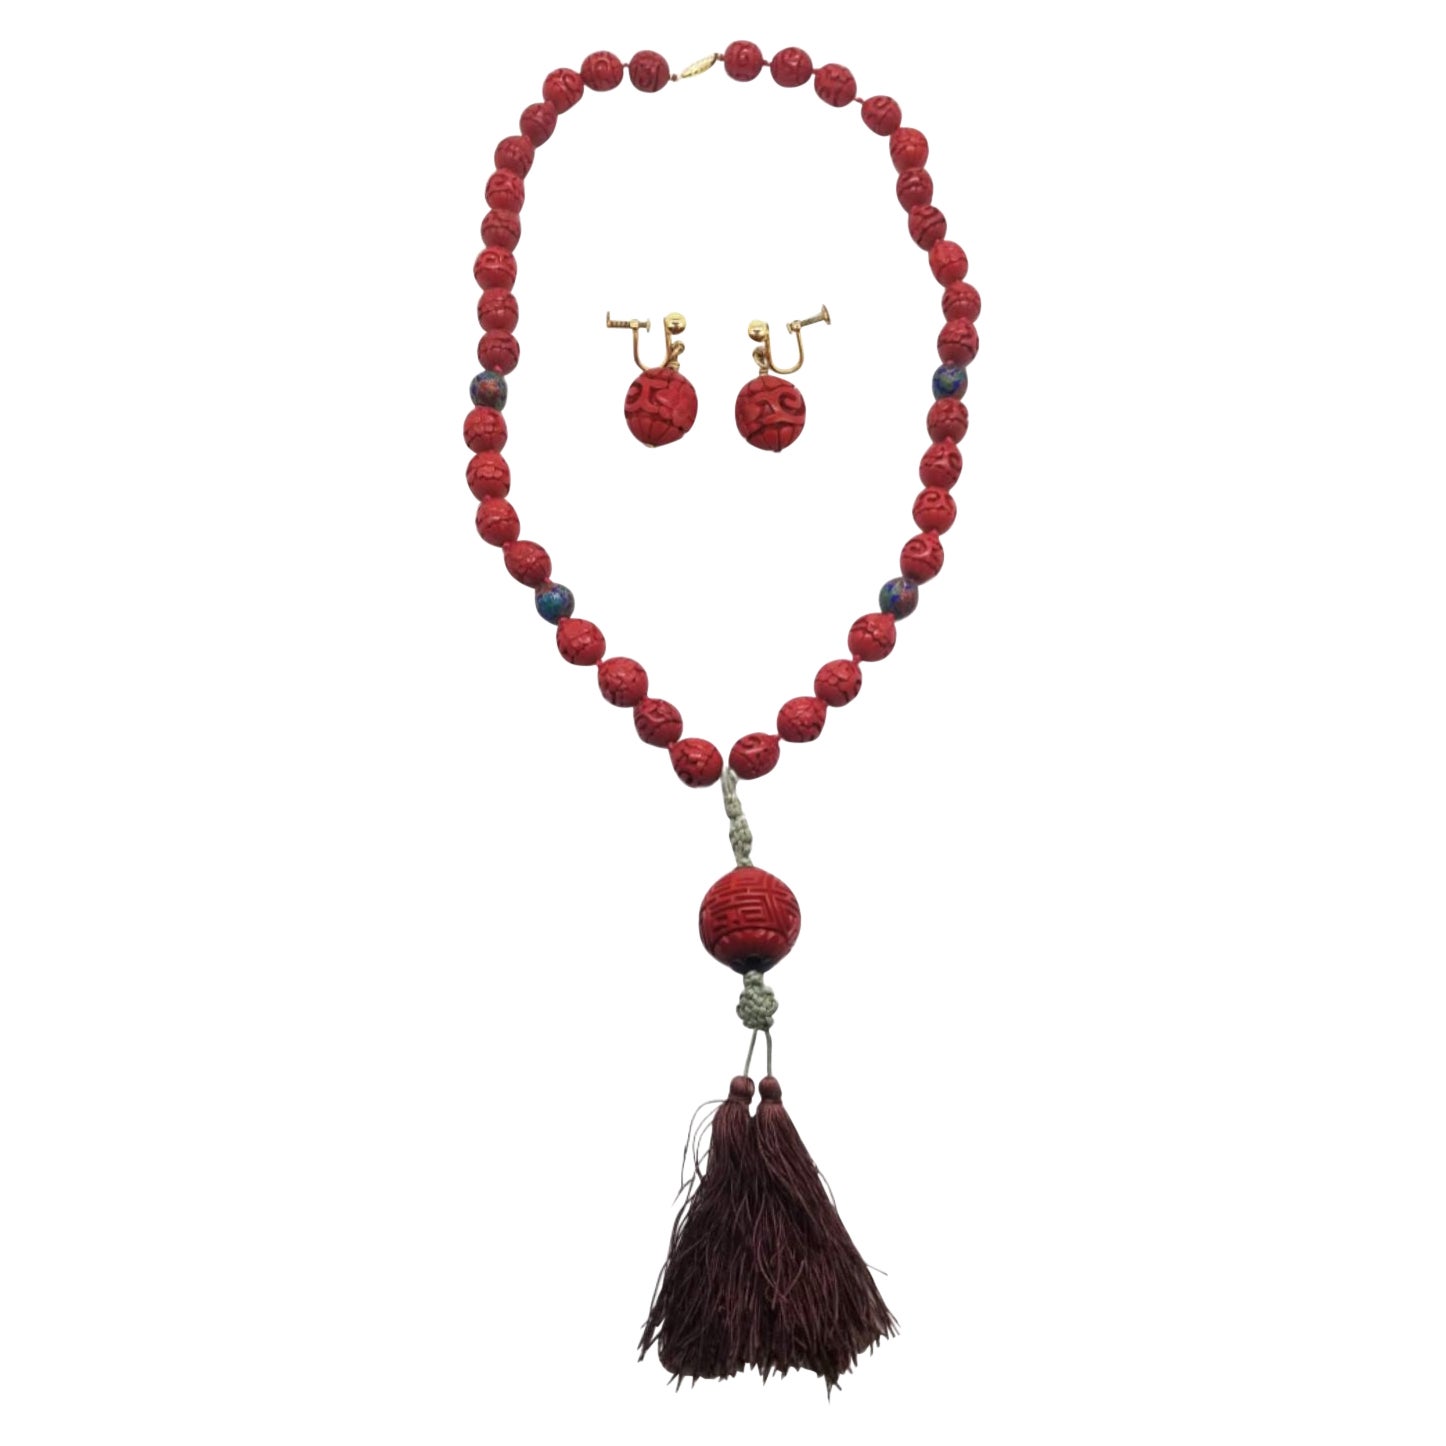 Vintage Chinese Cinnabar Shou Pendant Beaded Necklace and Matching Earrings.